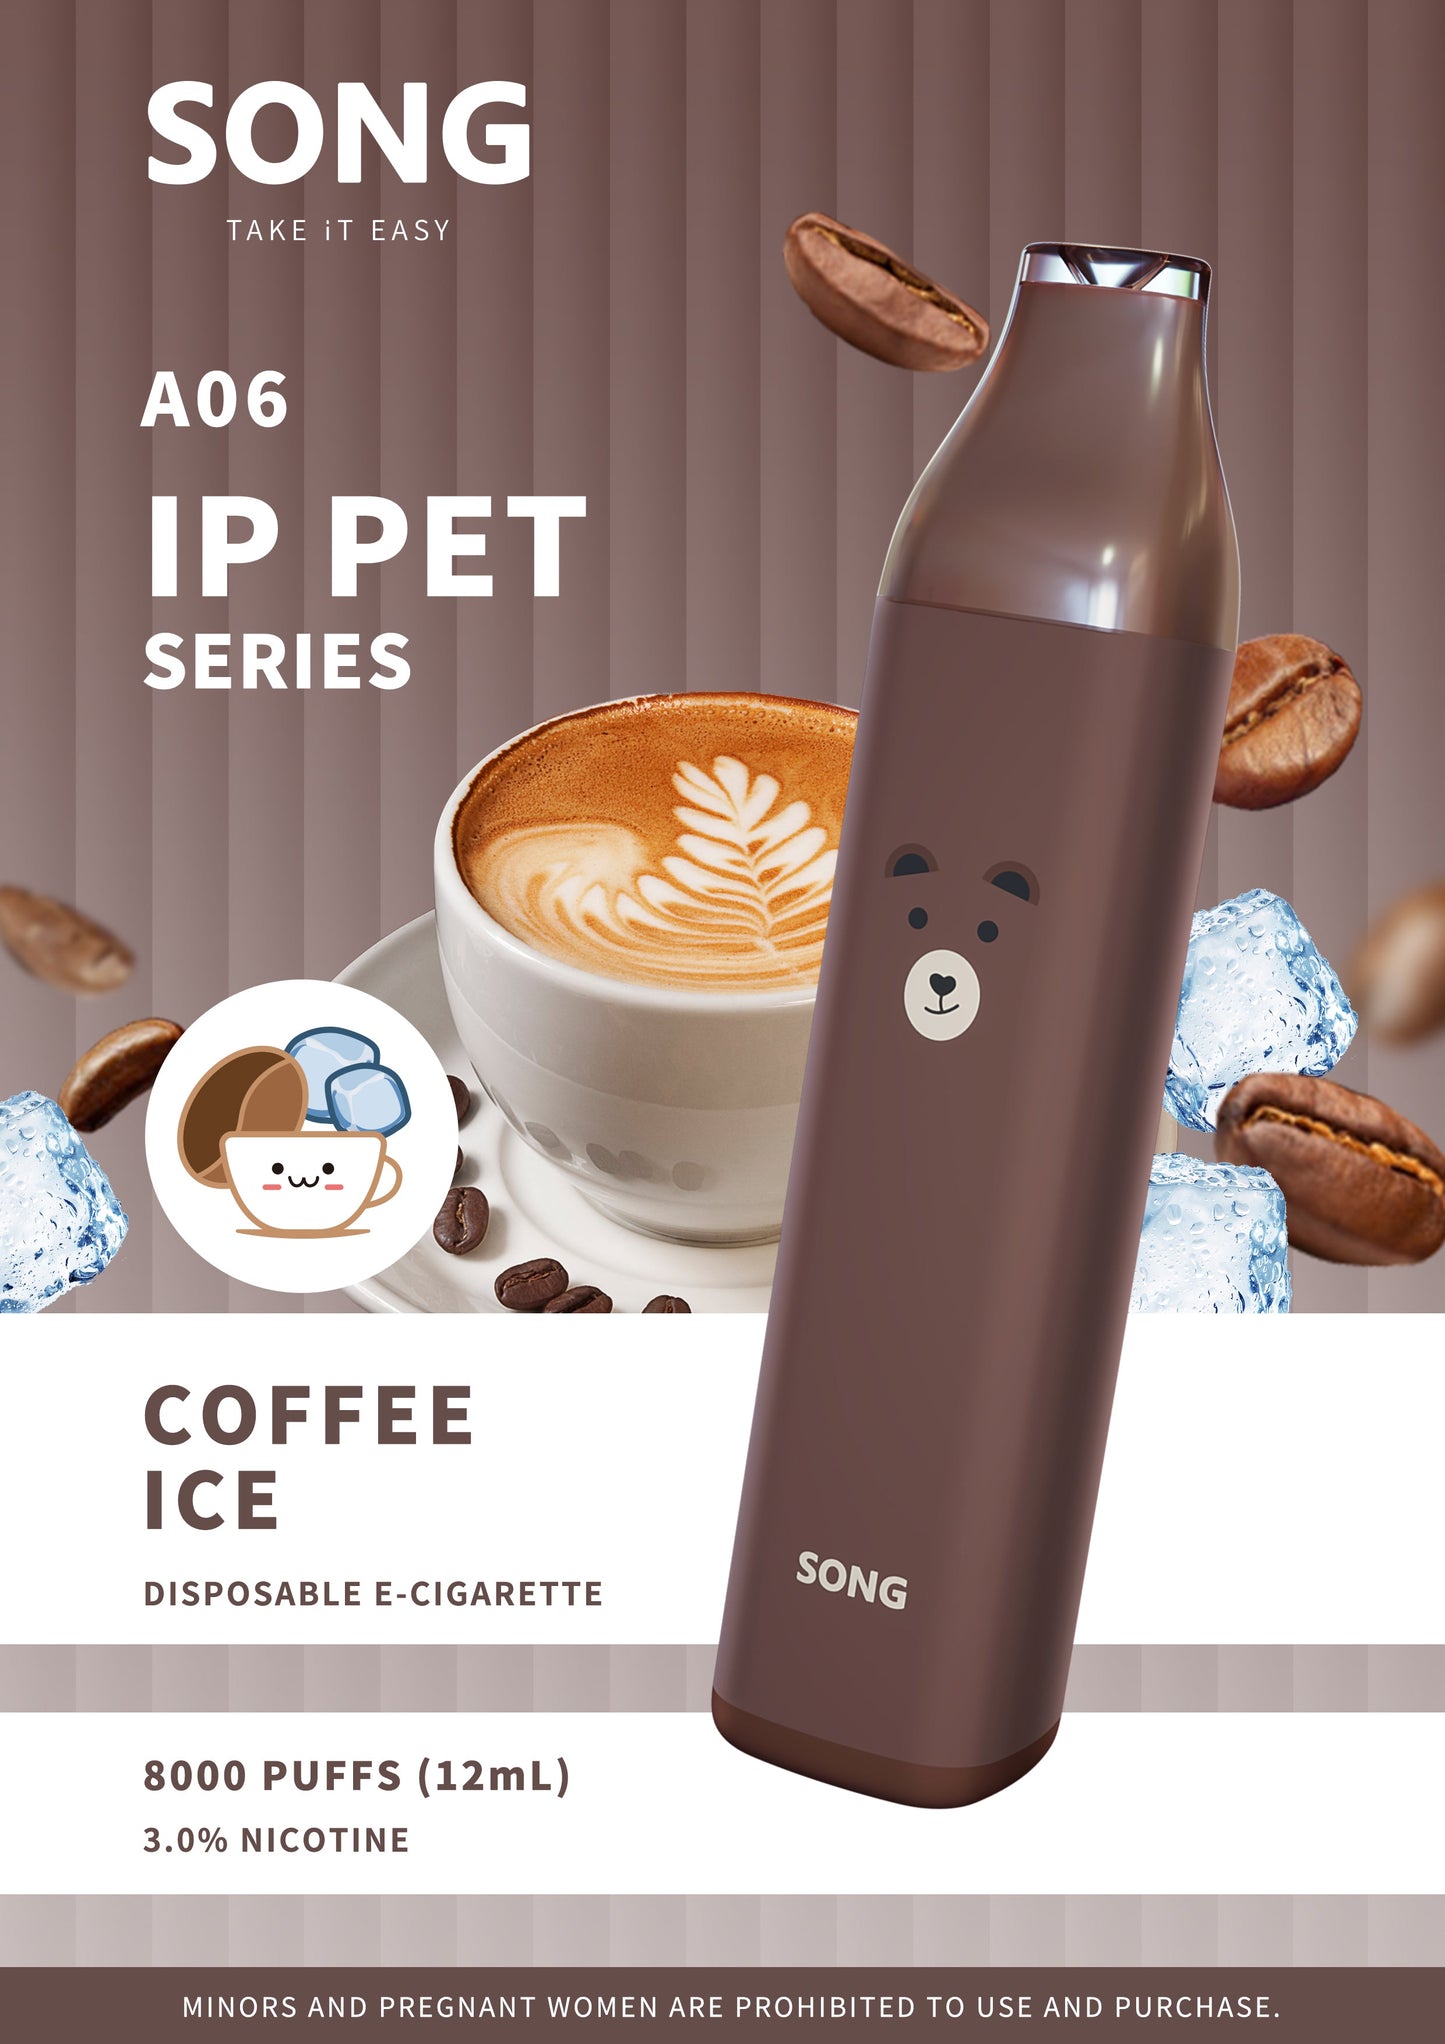 SONG 8000 puffs IP PET "so cute and tasty" series